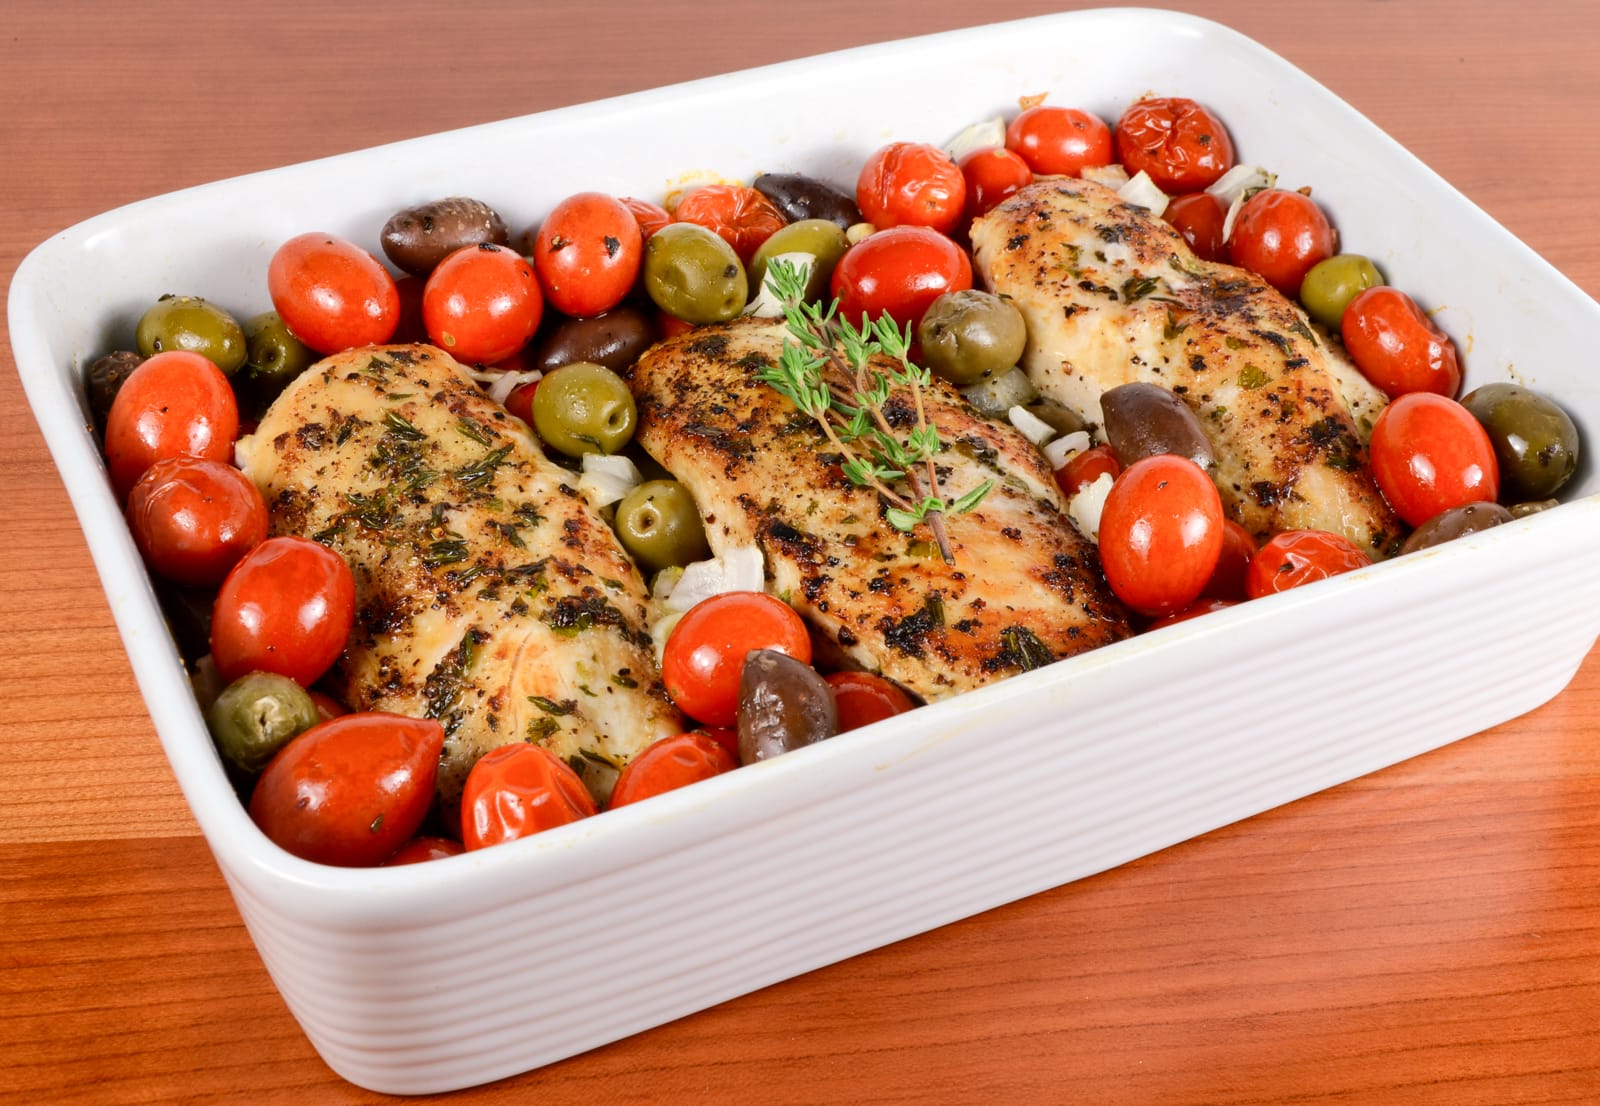 Baked Mediterranean Chicken Breasts with Tomatoes, Olives, Capers, and Garlic